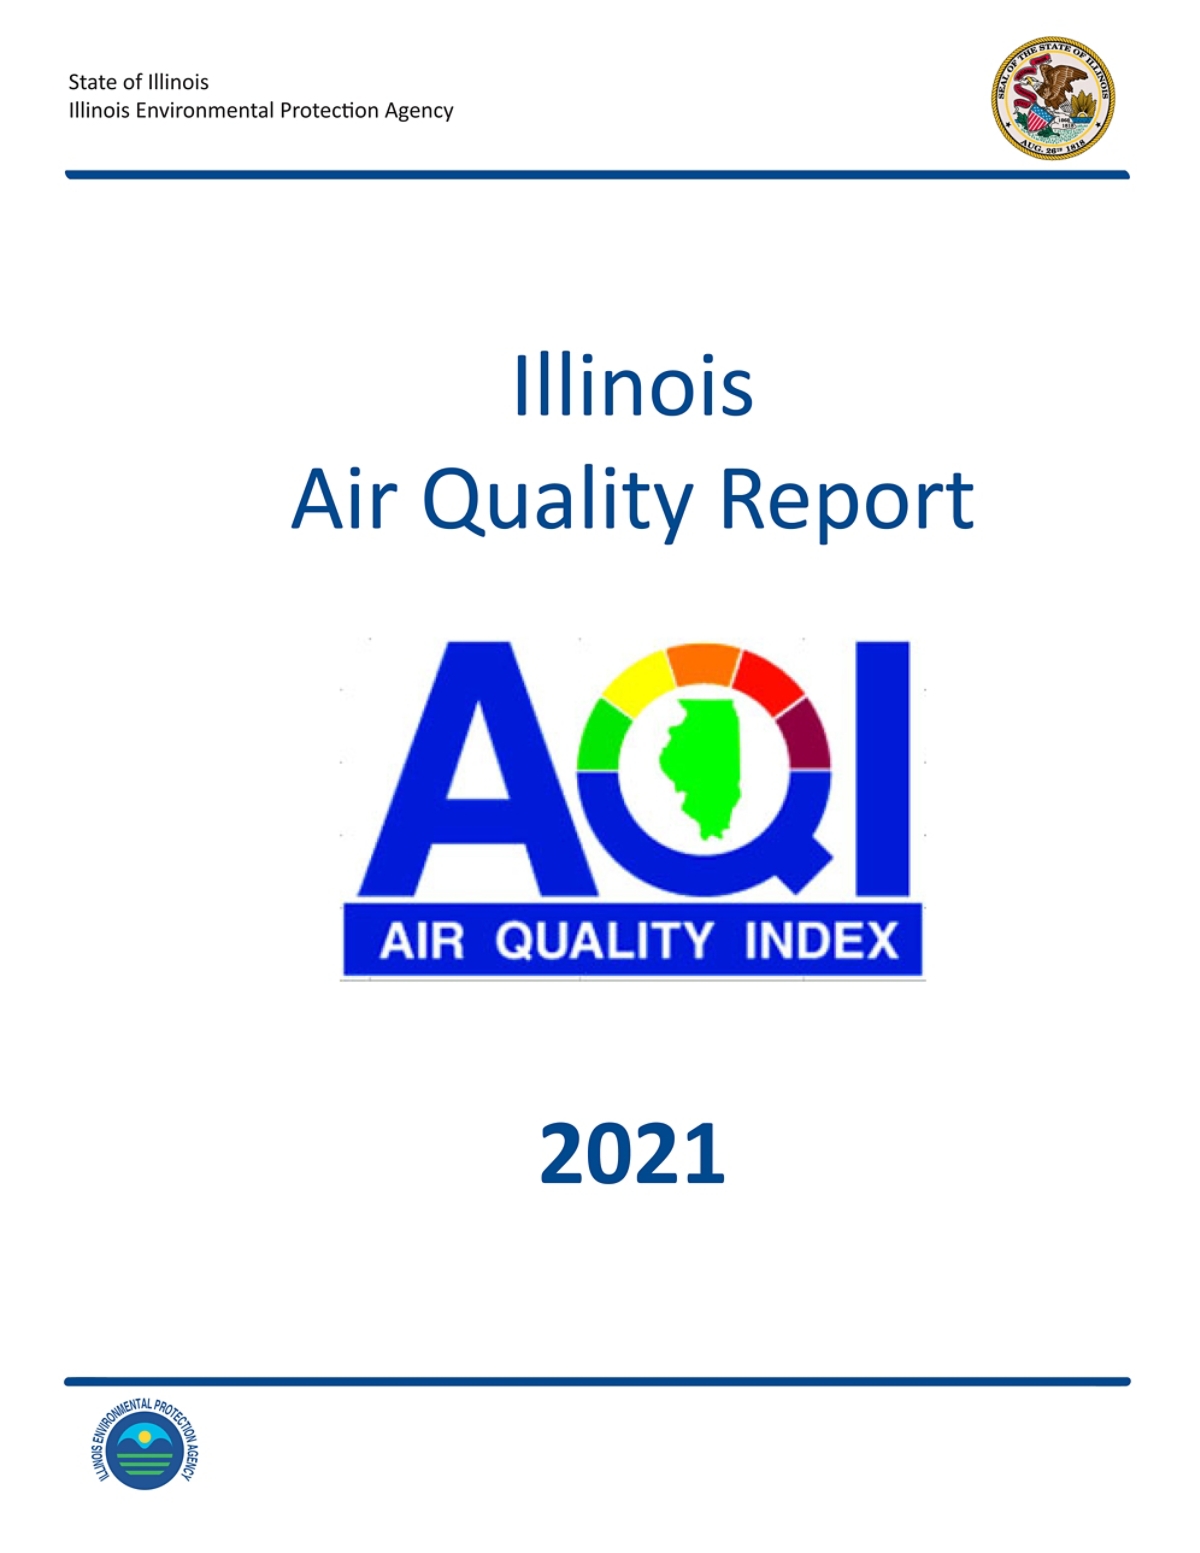 Tribal Air Quality and Programs Examined in New Report